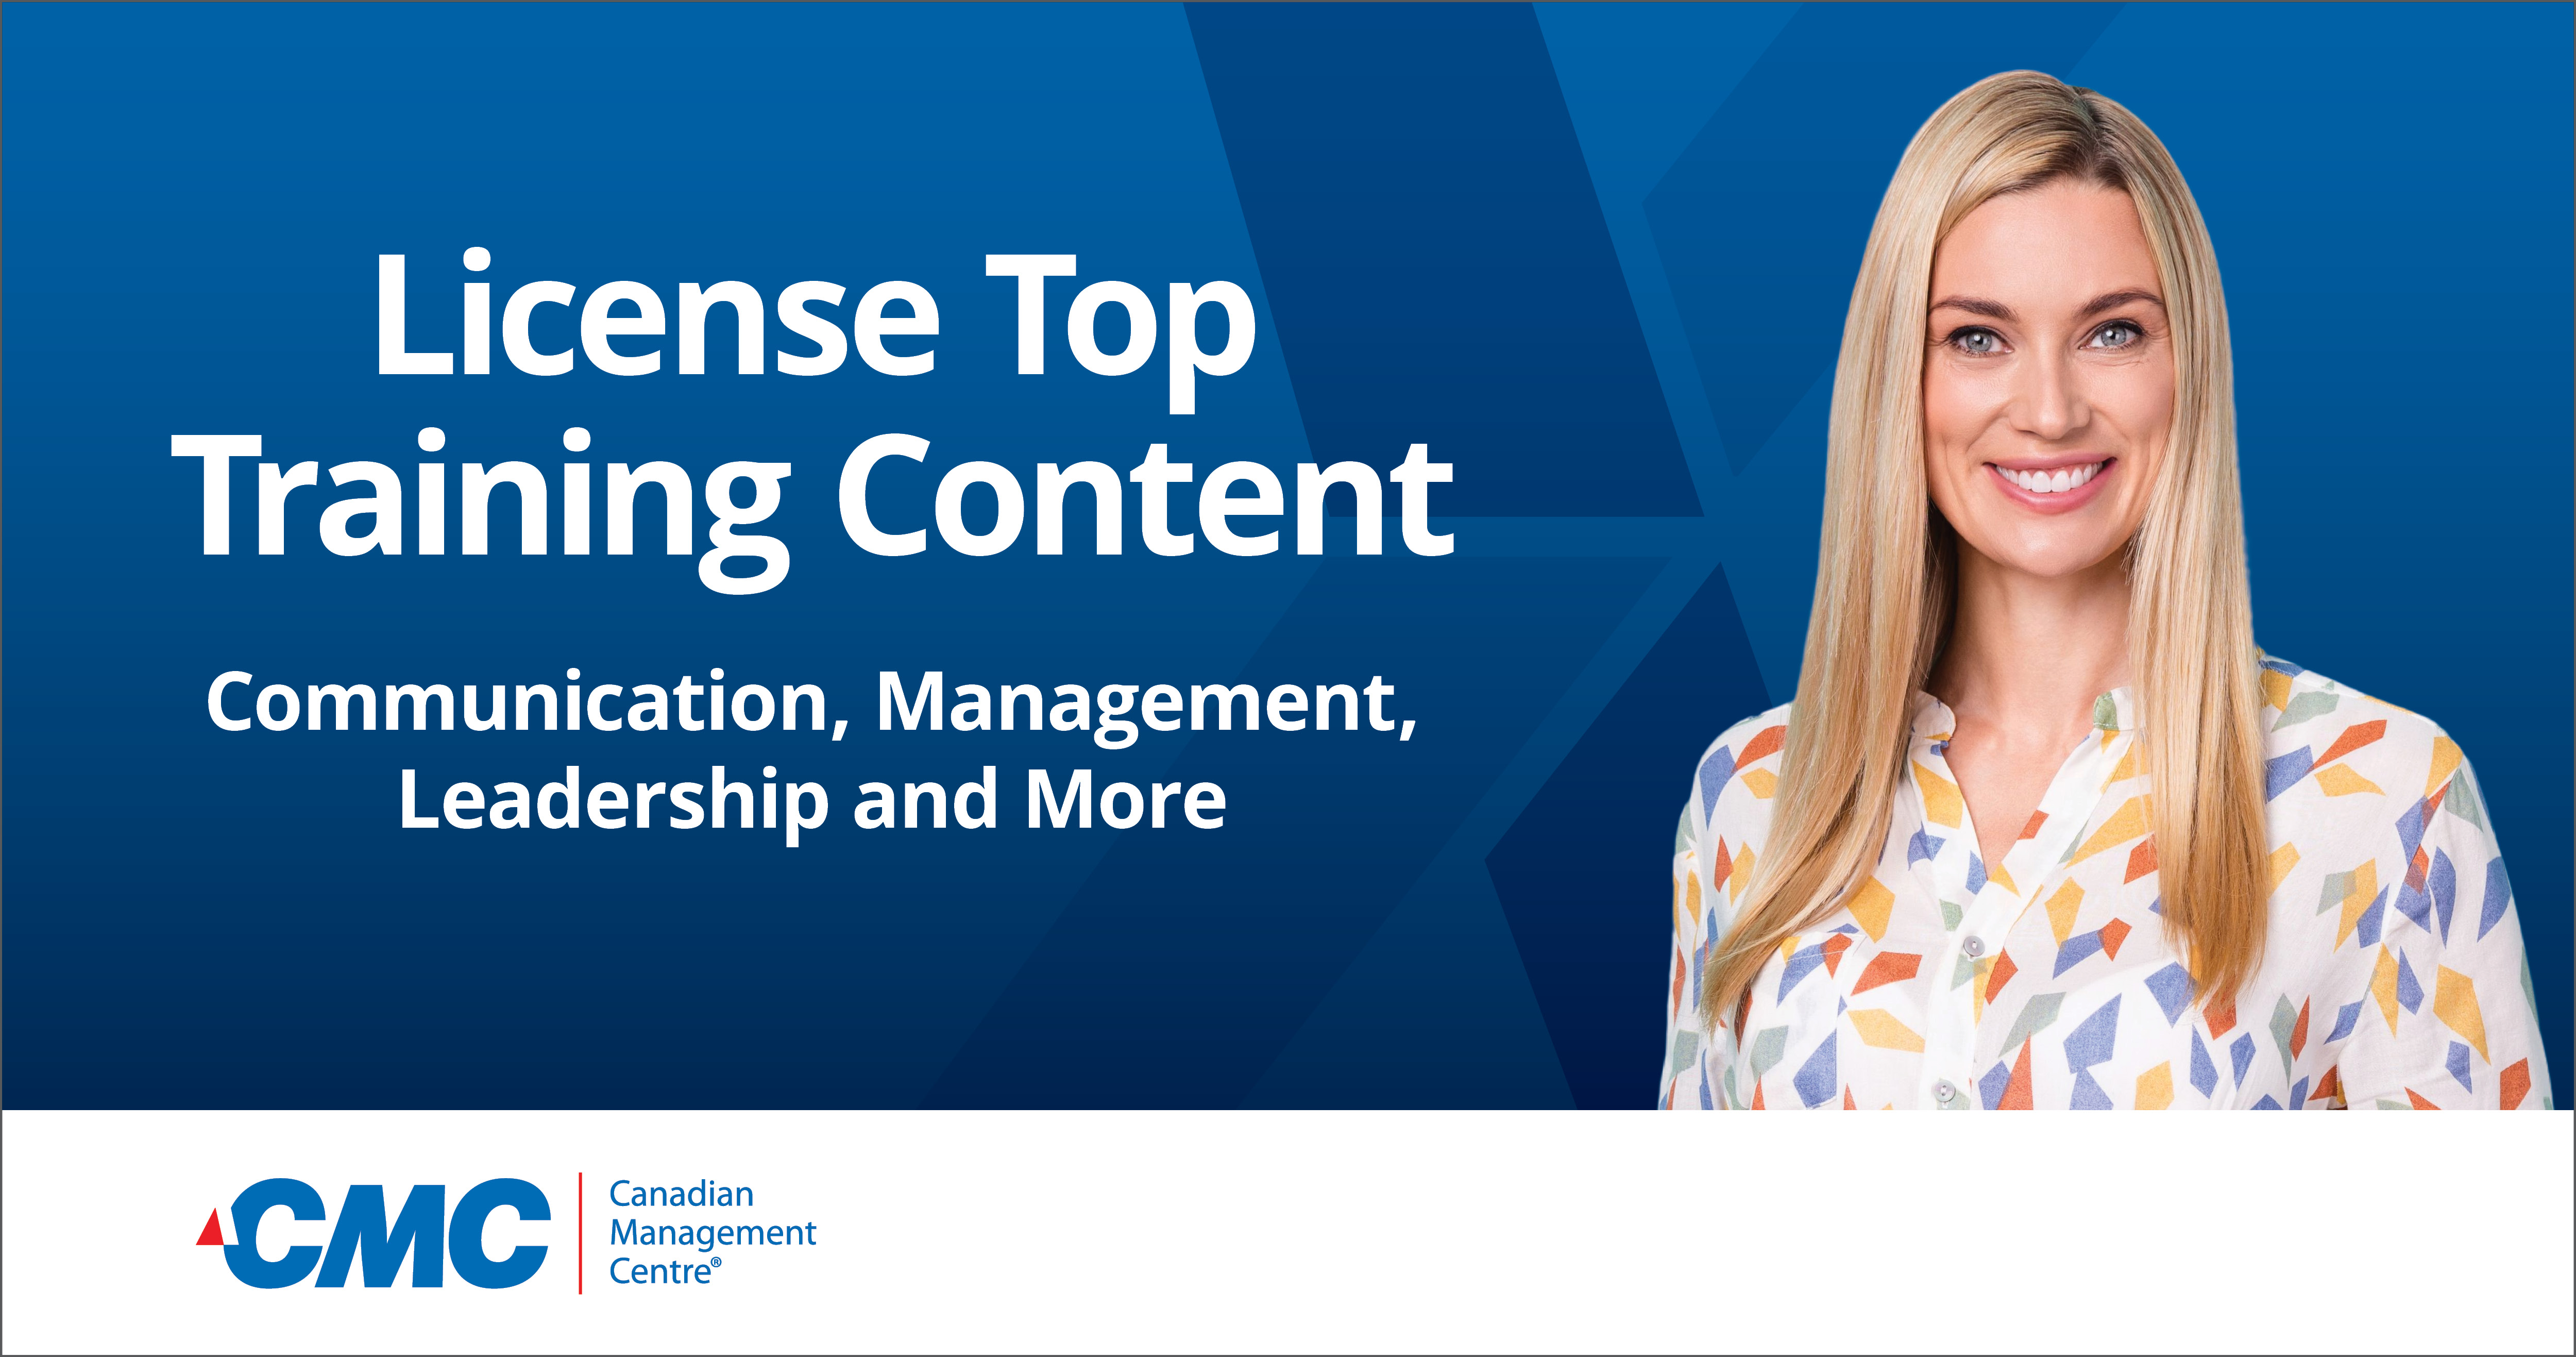 License Top Training Content from CMC image